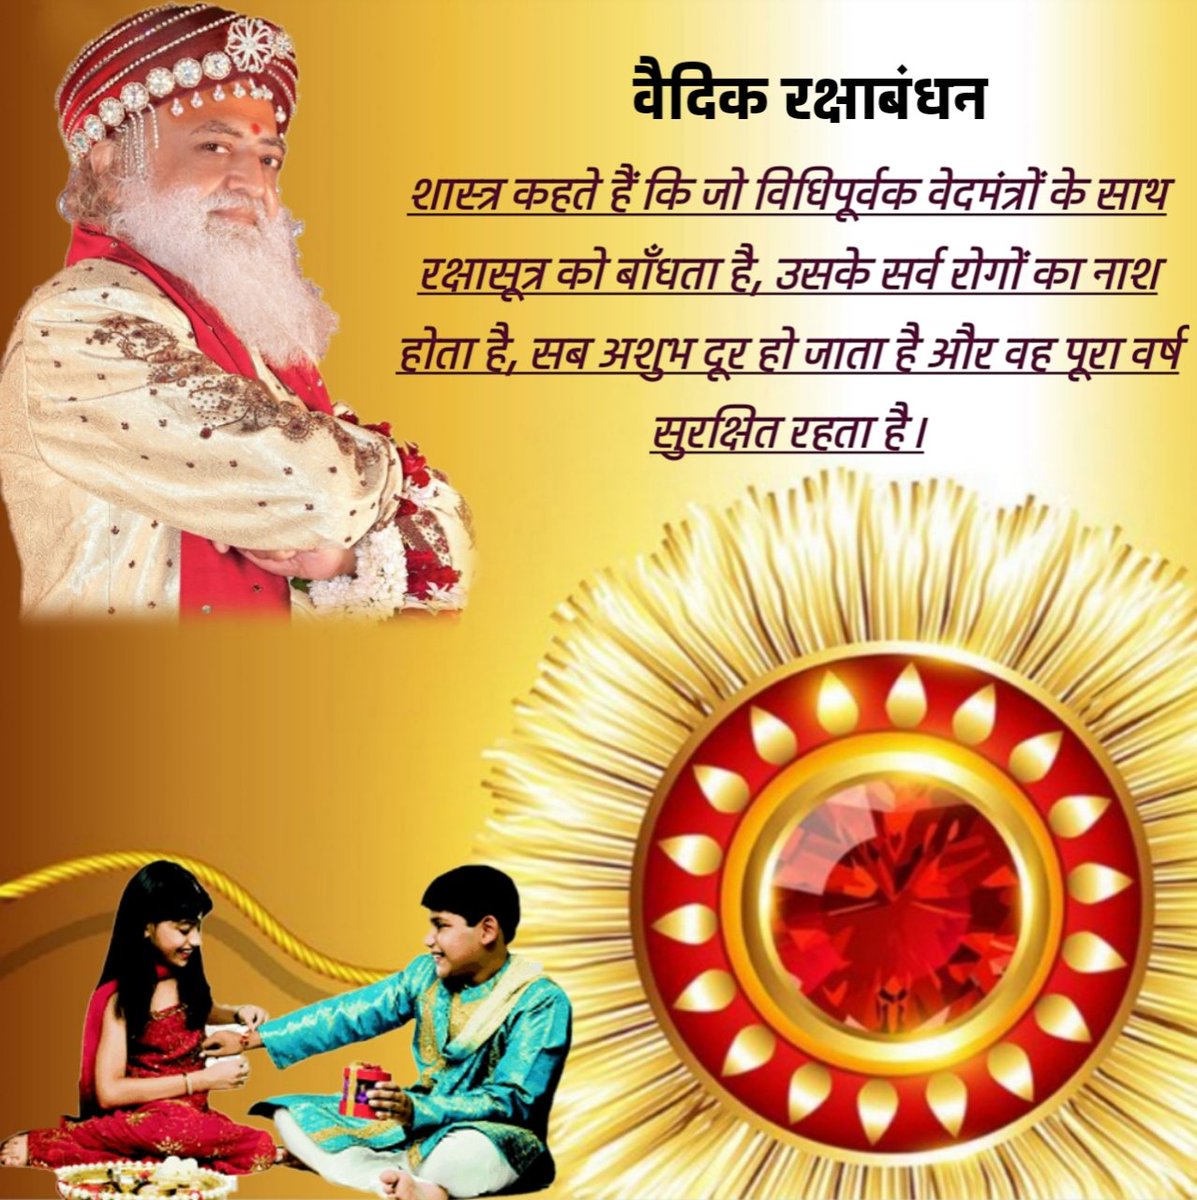 Rakshabandhan Greetings & warm wishes to all 🙂  #वैदिक_रक्षाबंधन_पर्व is the festival of divine resolutions for others, while chating divine Mantras, tying Vedic Rakhi made with mustard seed, Durva, sandal, Akshat, Kesar etc.